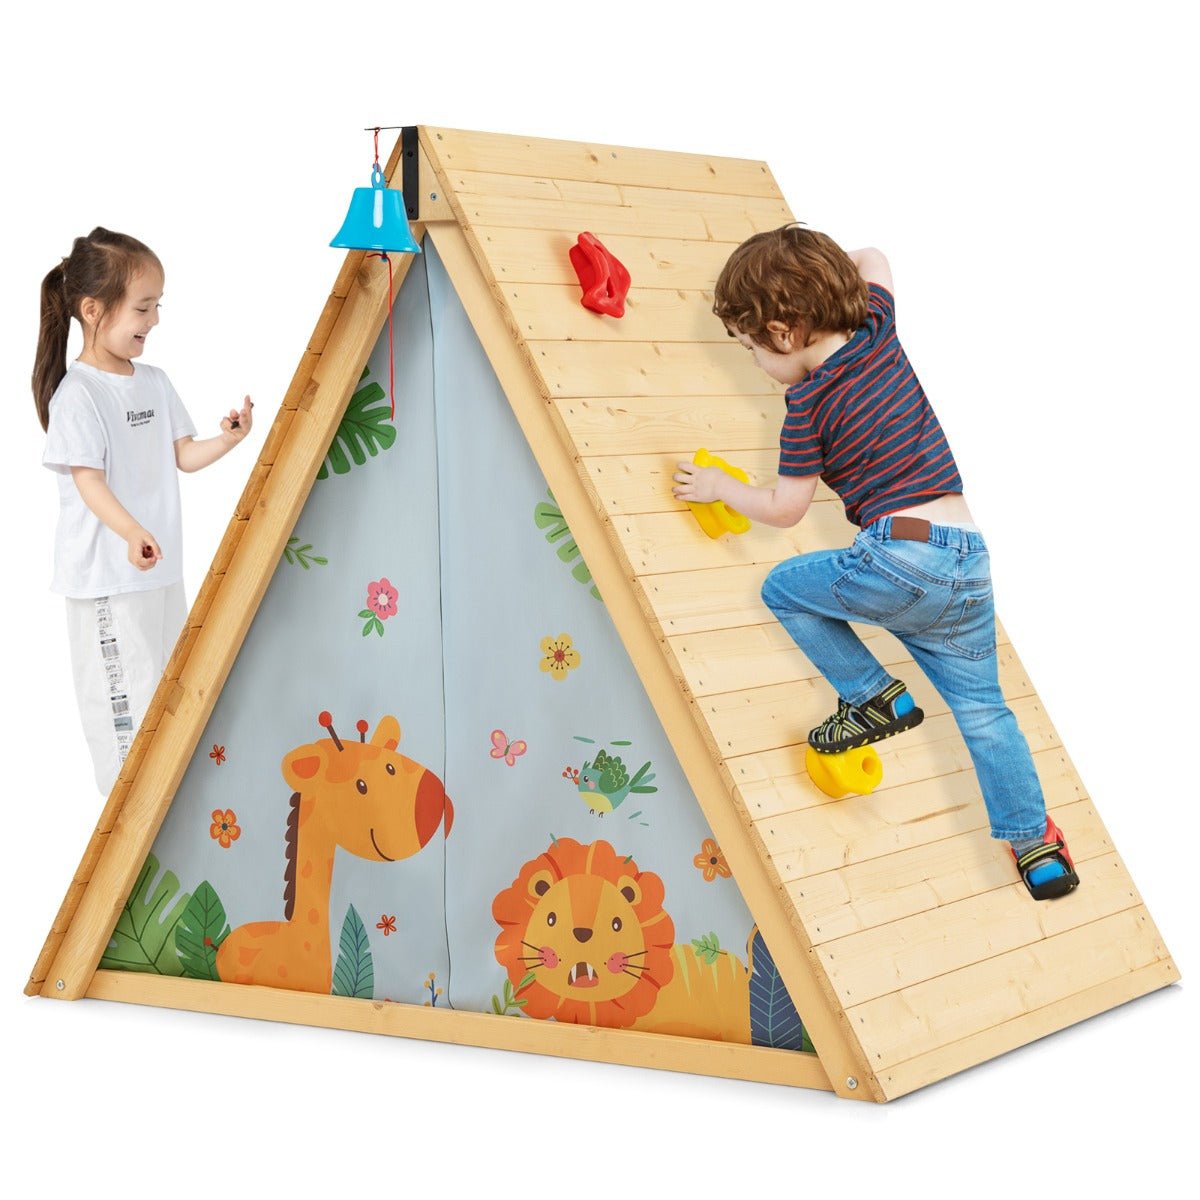 Engage and Climb: 2-in-1 Kids Play Tent with Wooden Climbing Triangle